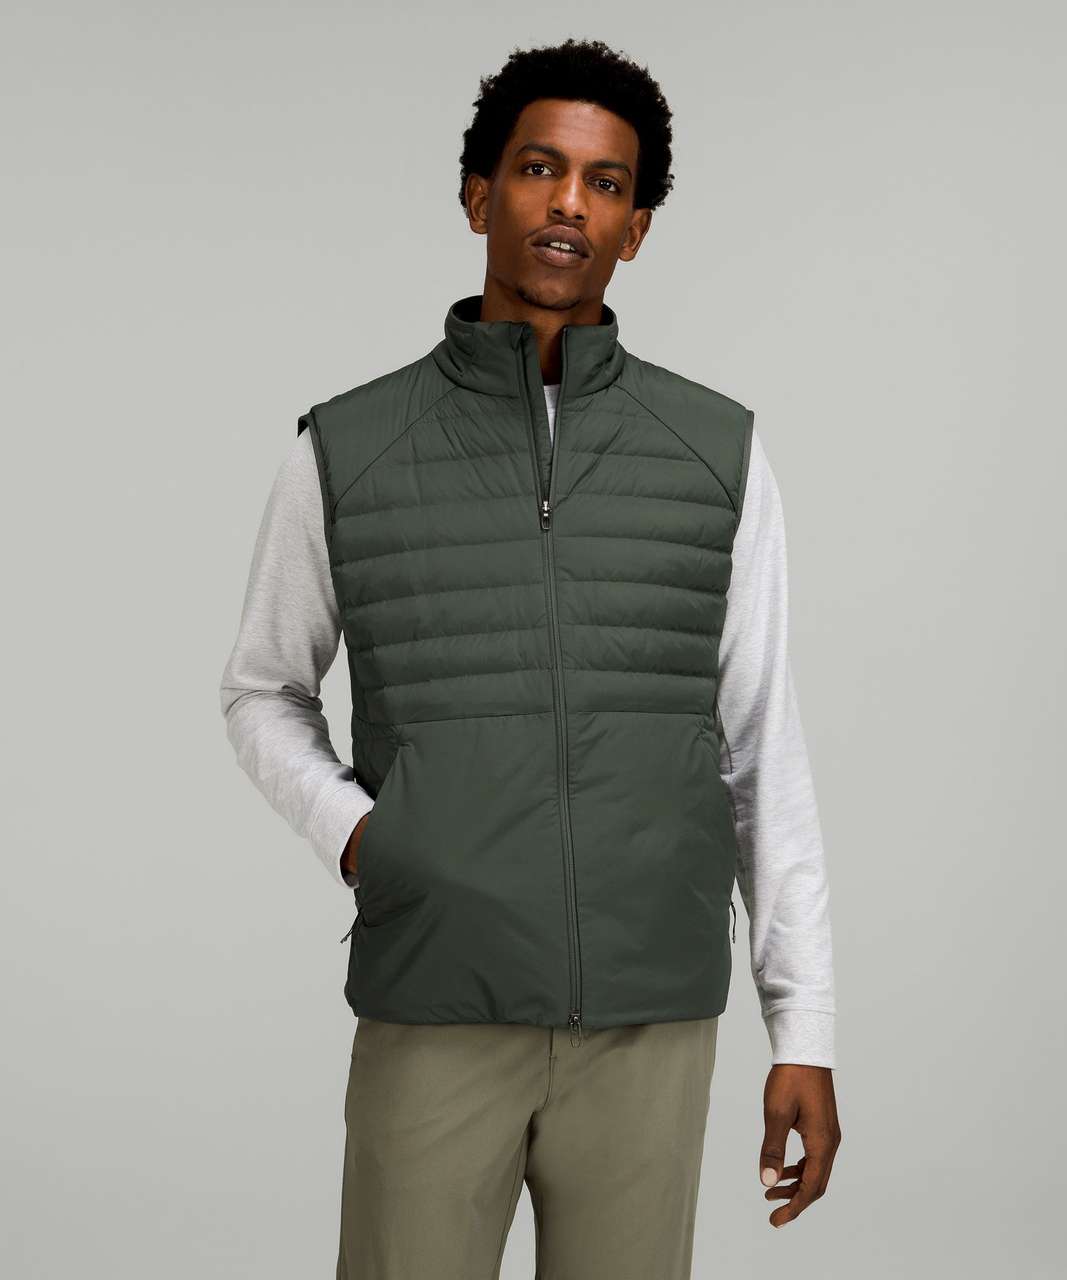 Lululemon Down for It All Vest - Smoked Spruce